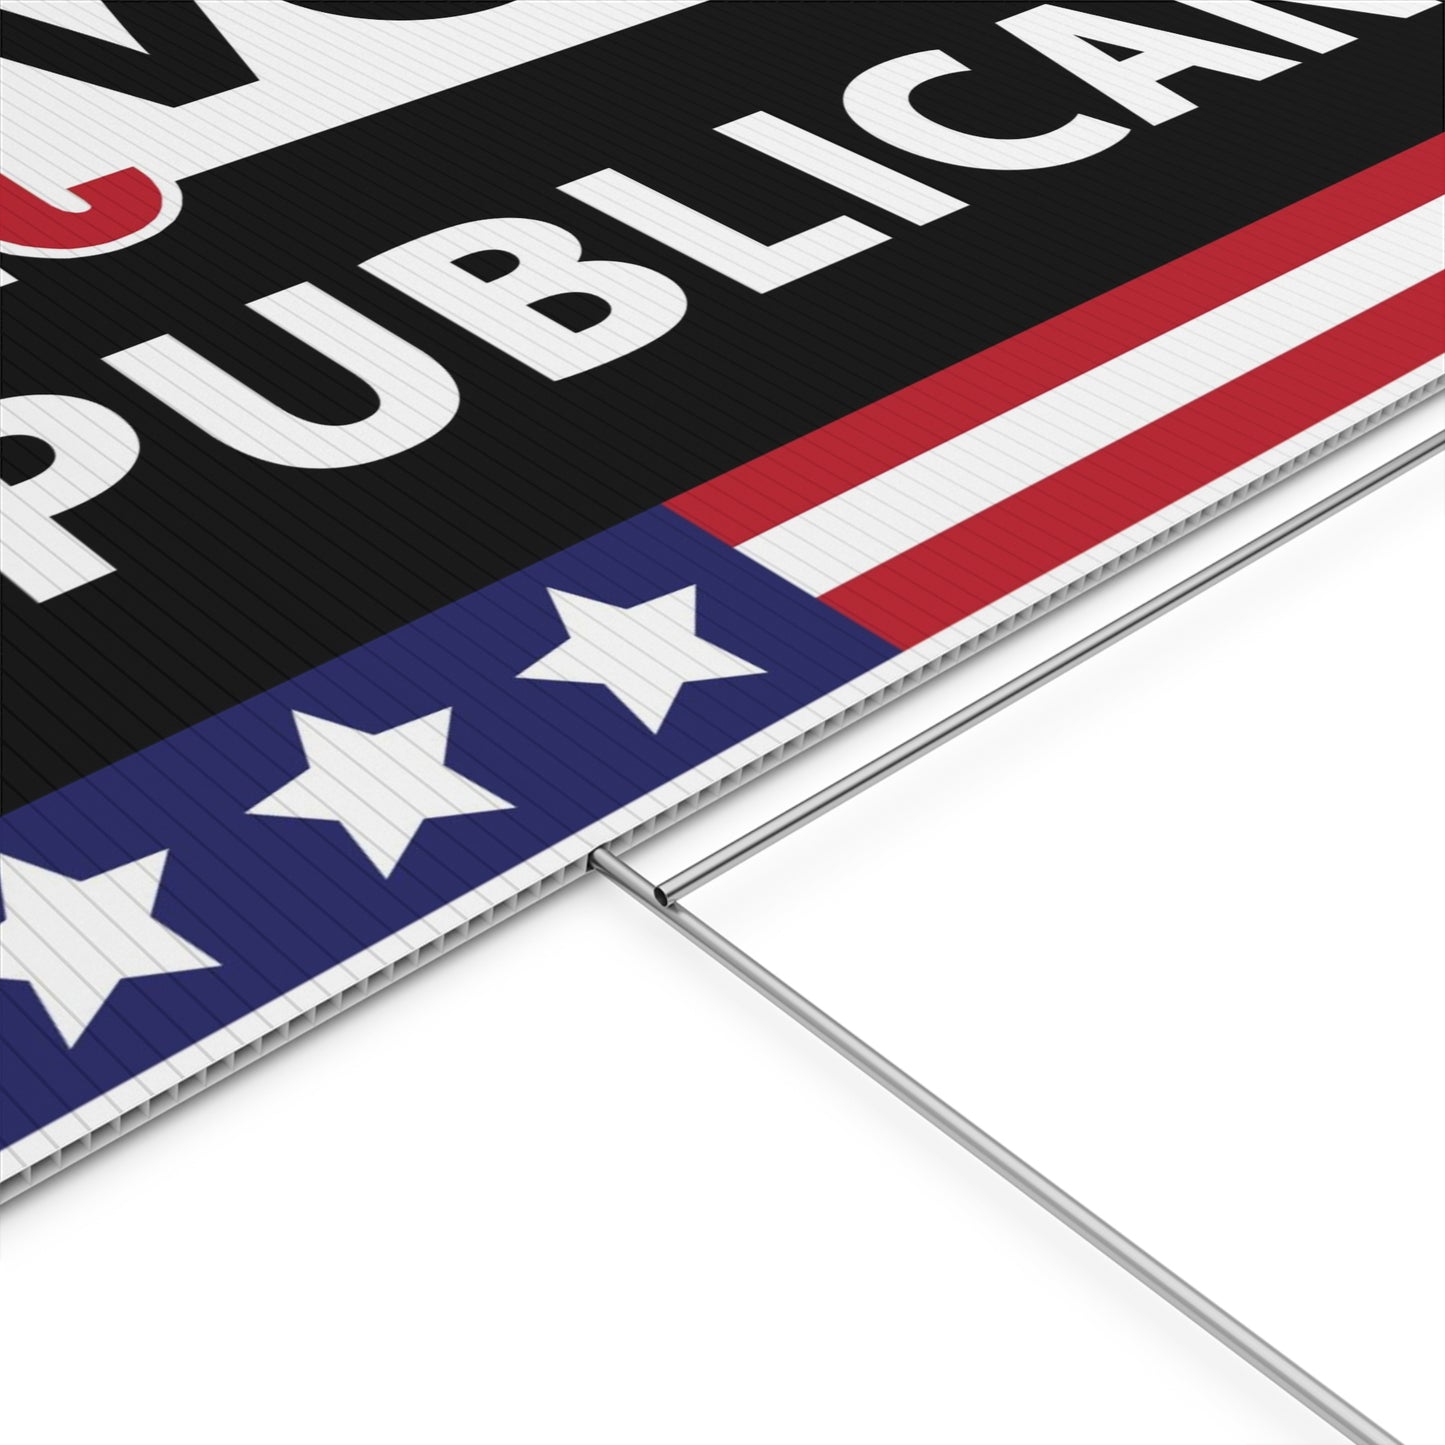 Vote Republican Yard Sign, 18x12, 24x18, 36x24, H-Stake Included, v1